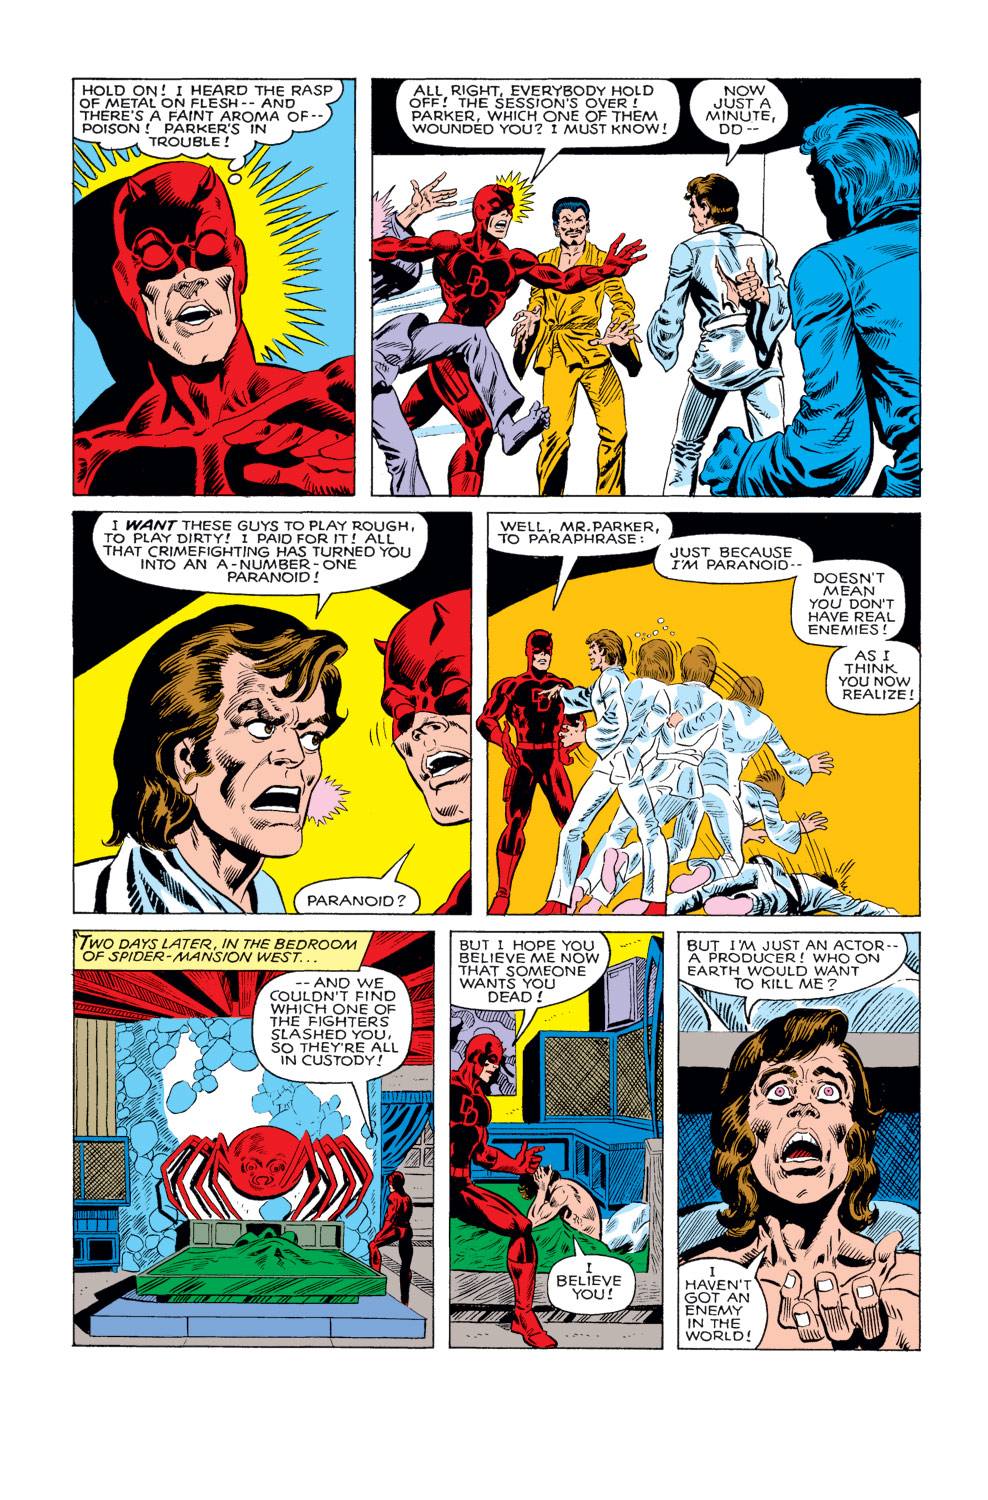 What If? (1977) issue 19 - Spider-Man had never become a crimefighter - Page 28